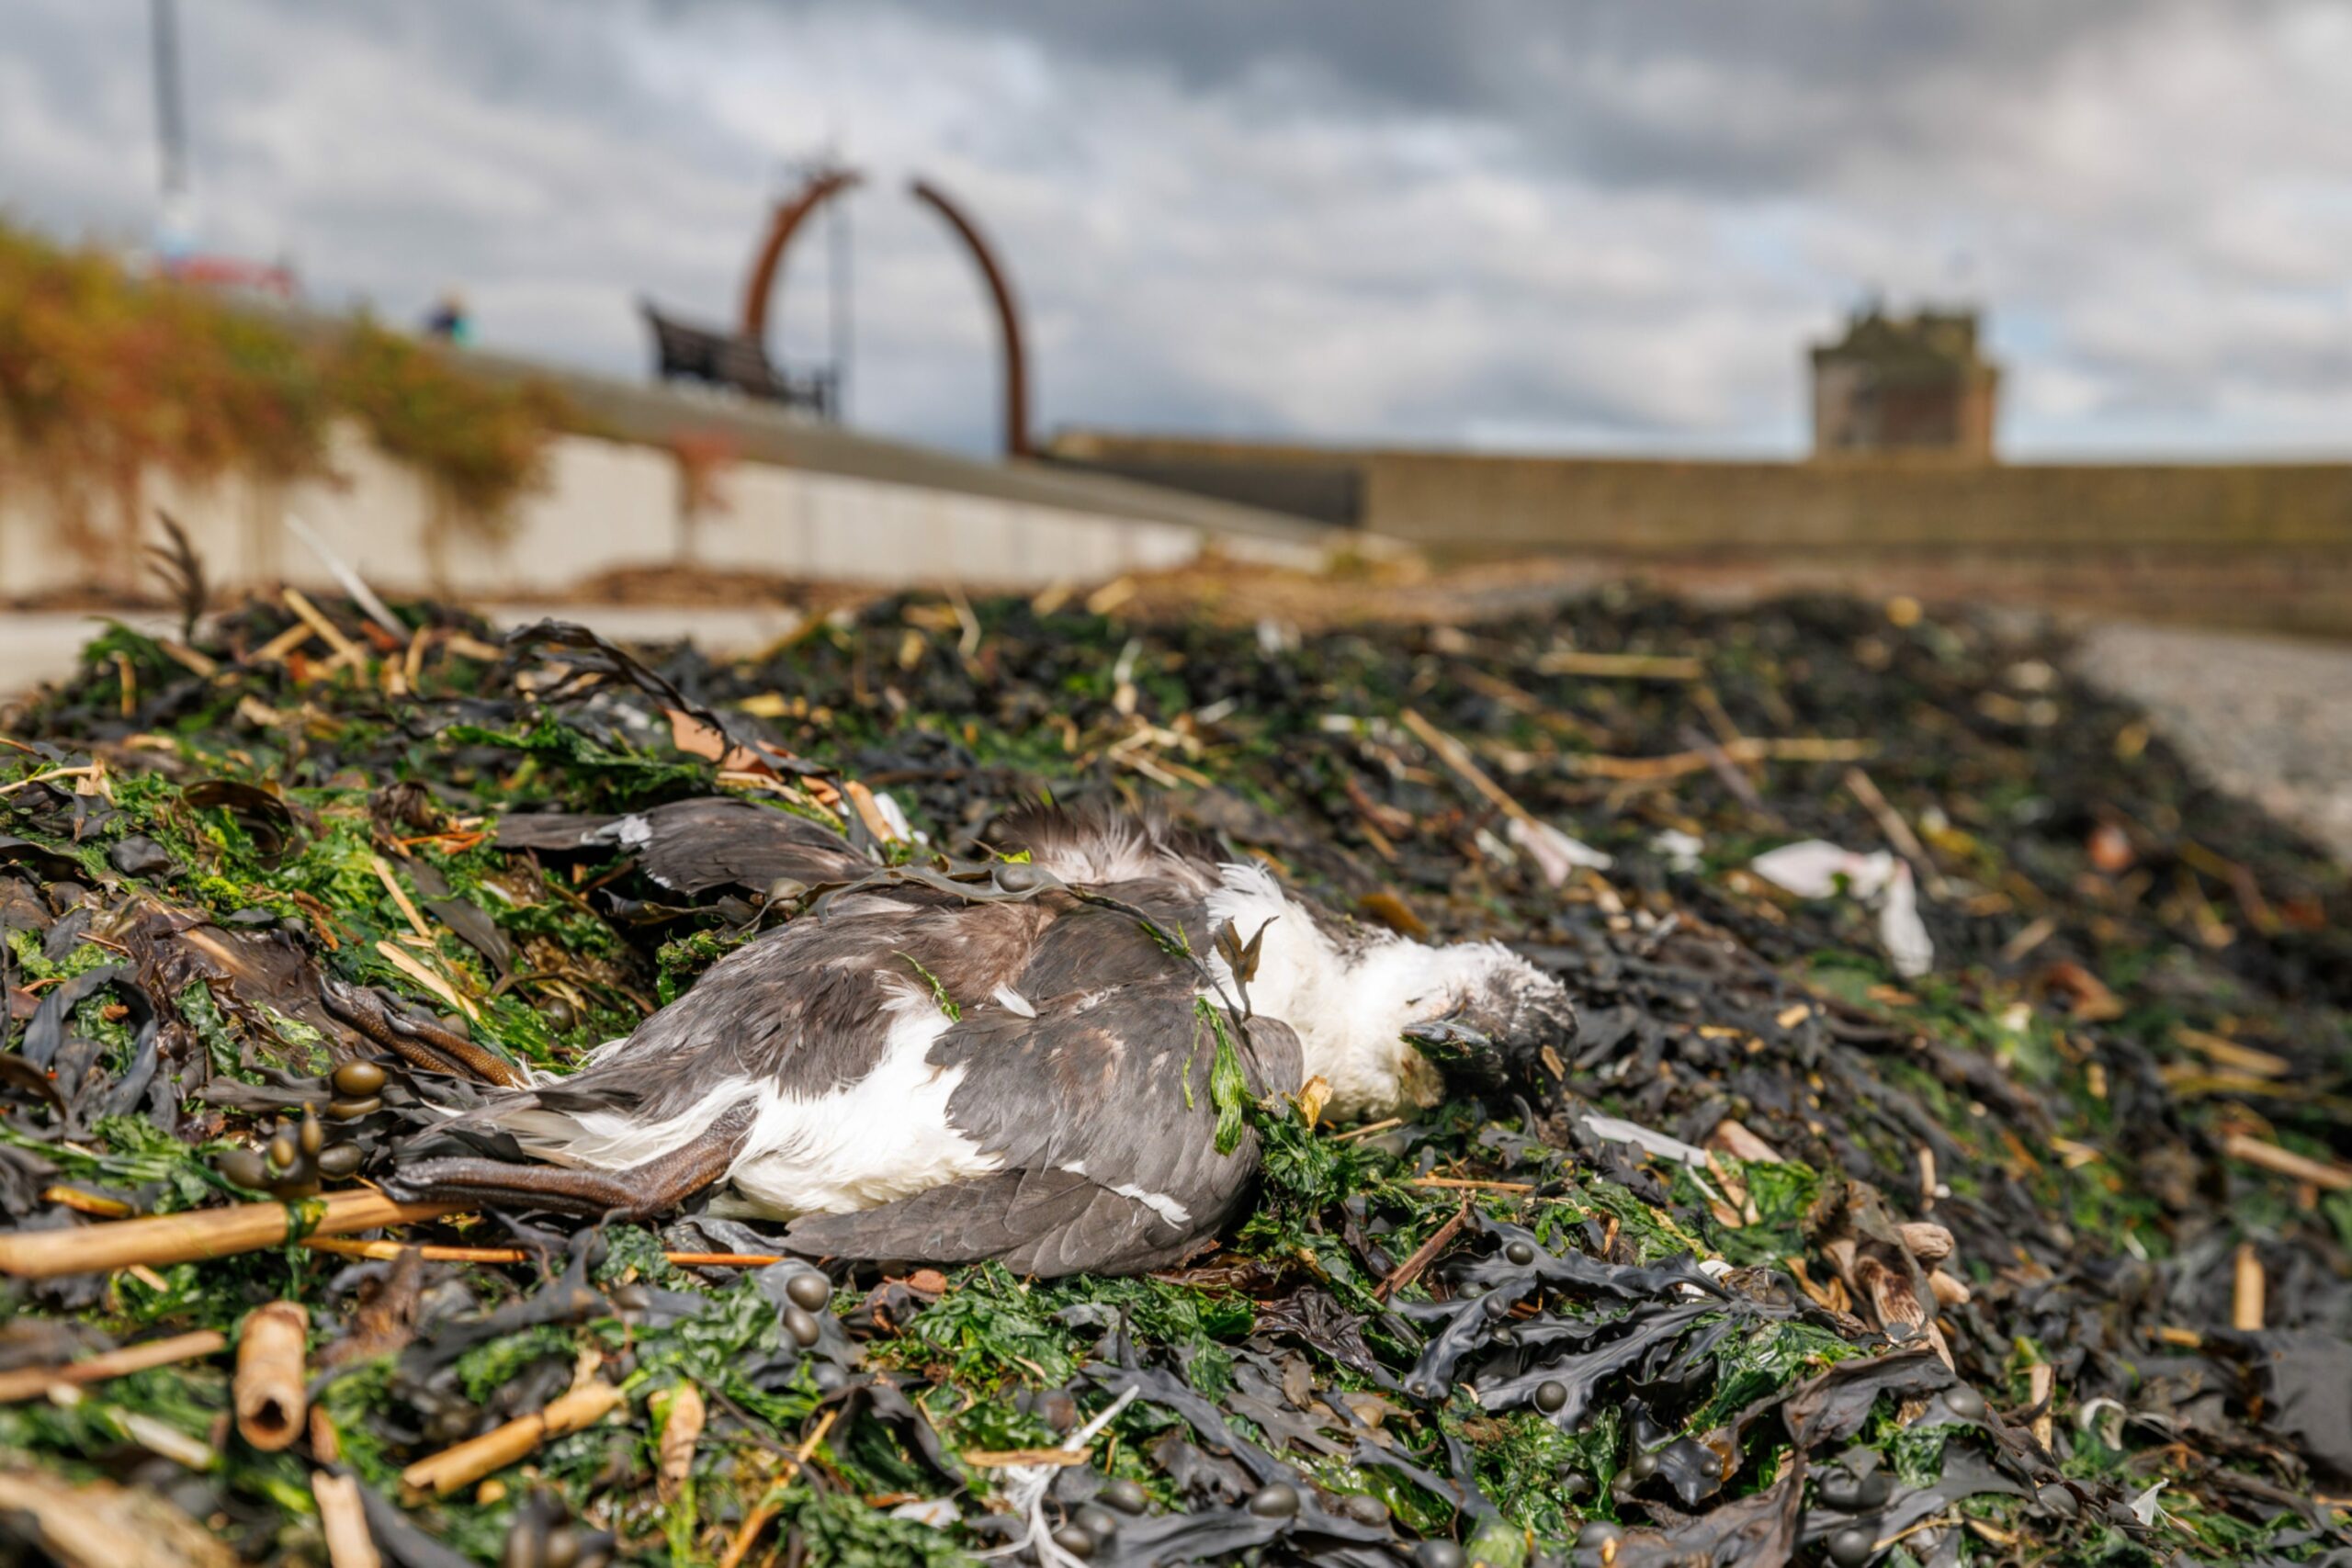 A dead seabird among the seaweed near Broughty Castle in Broughty Ferry